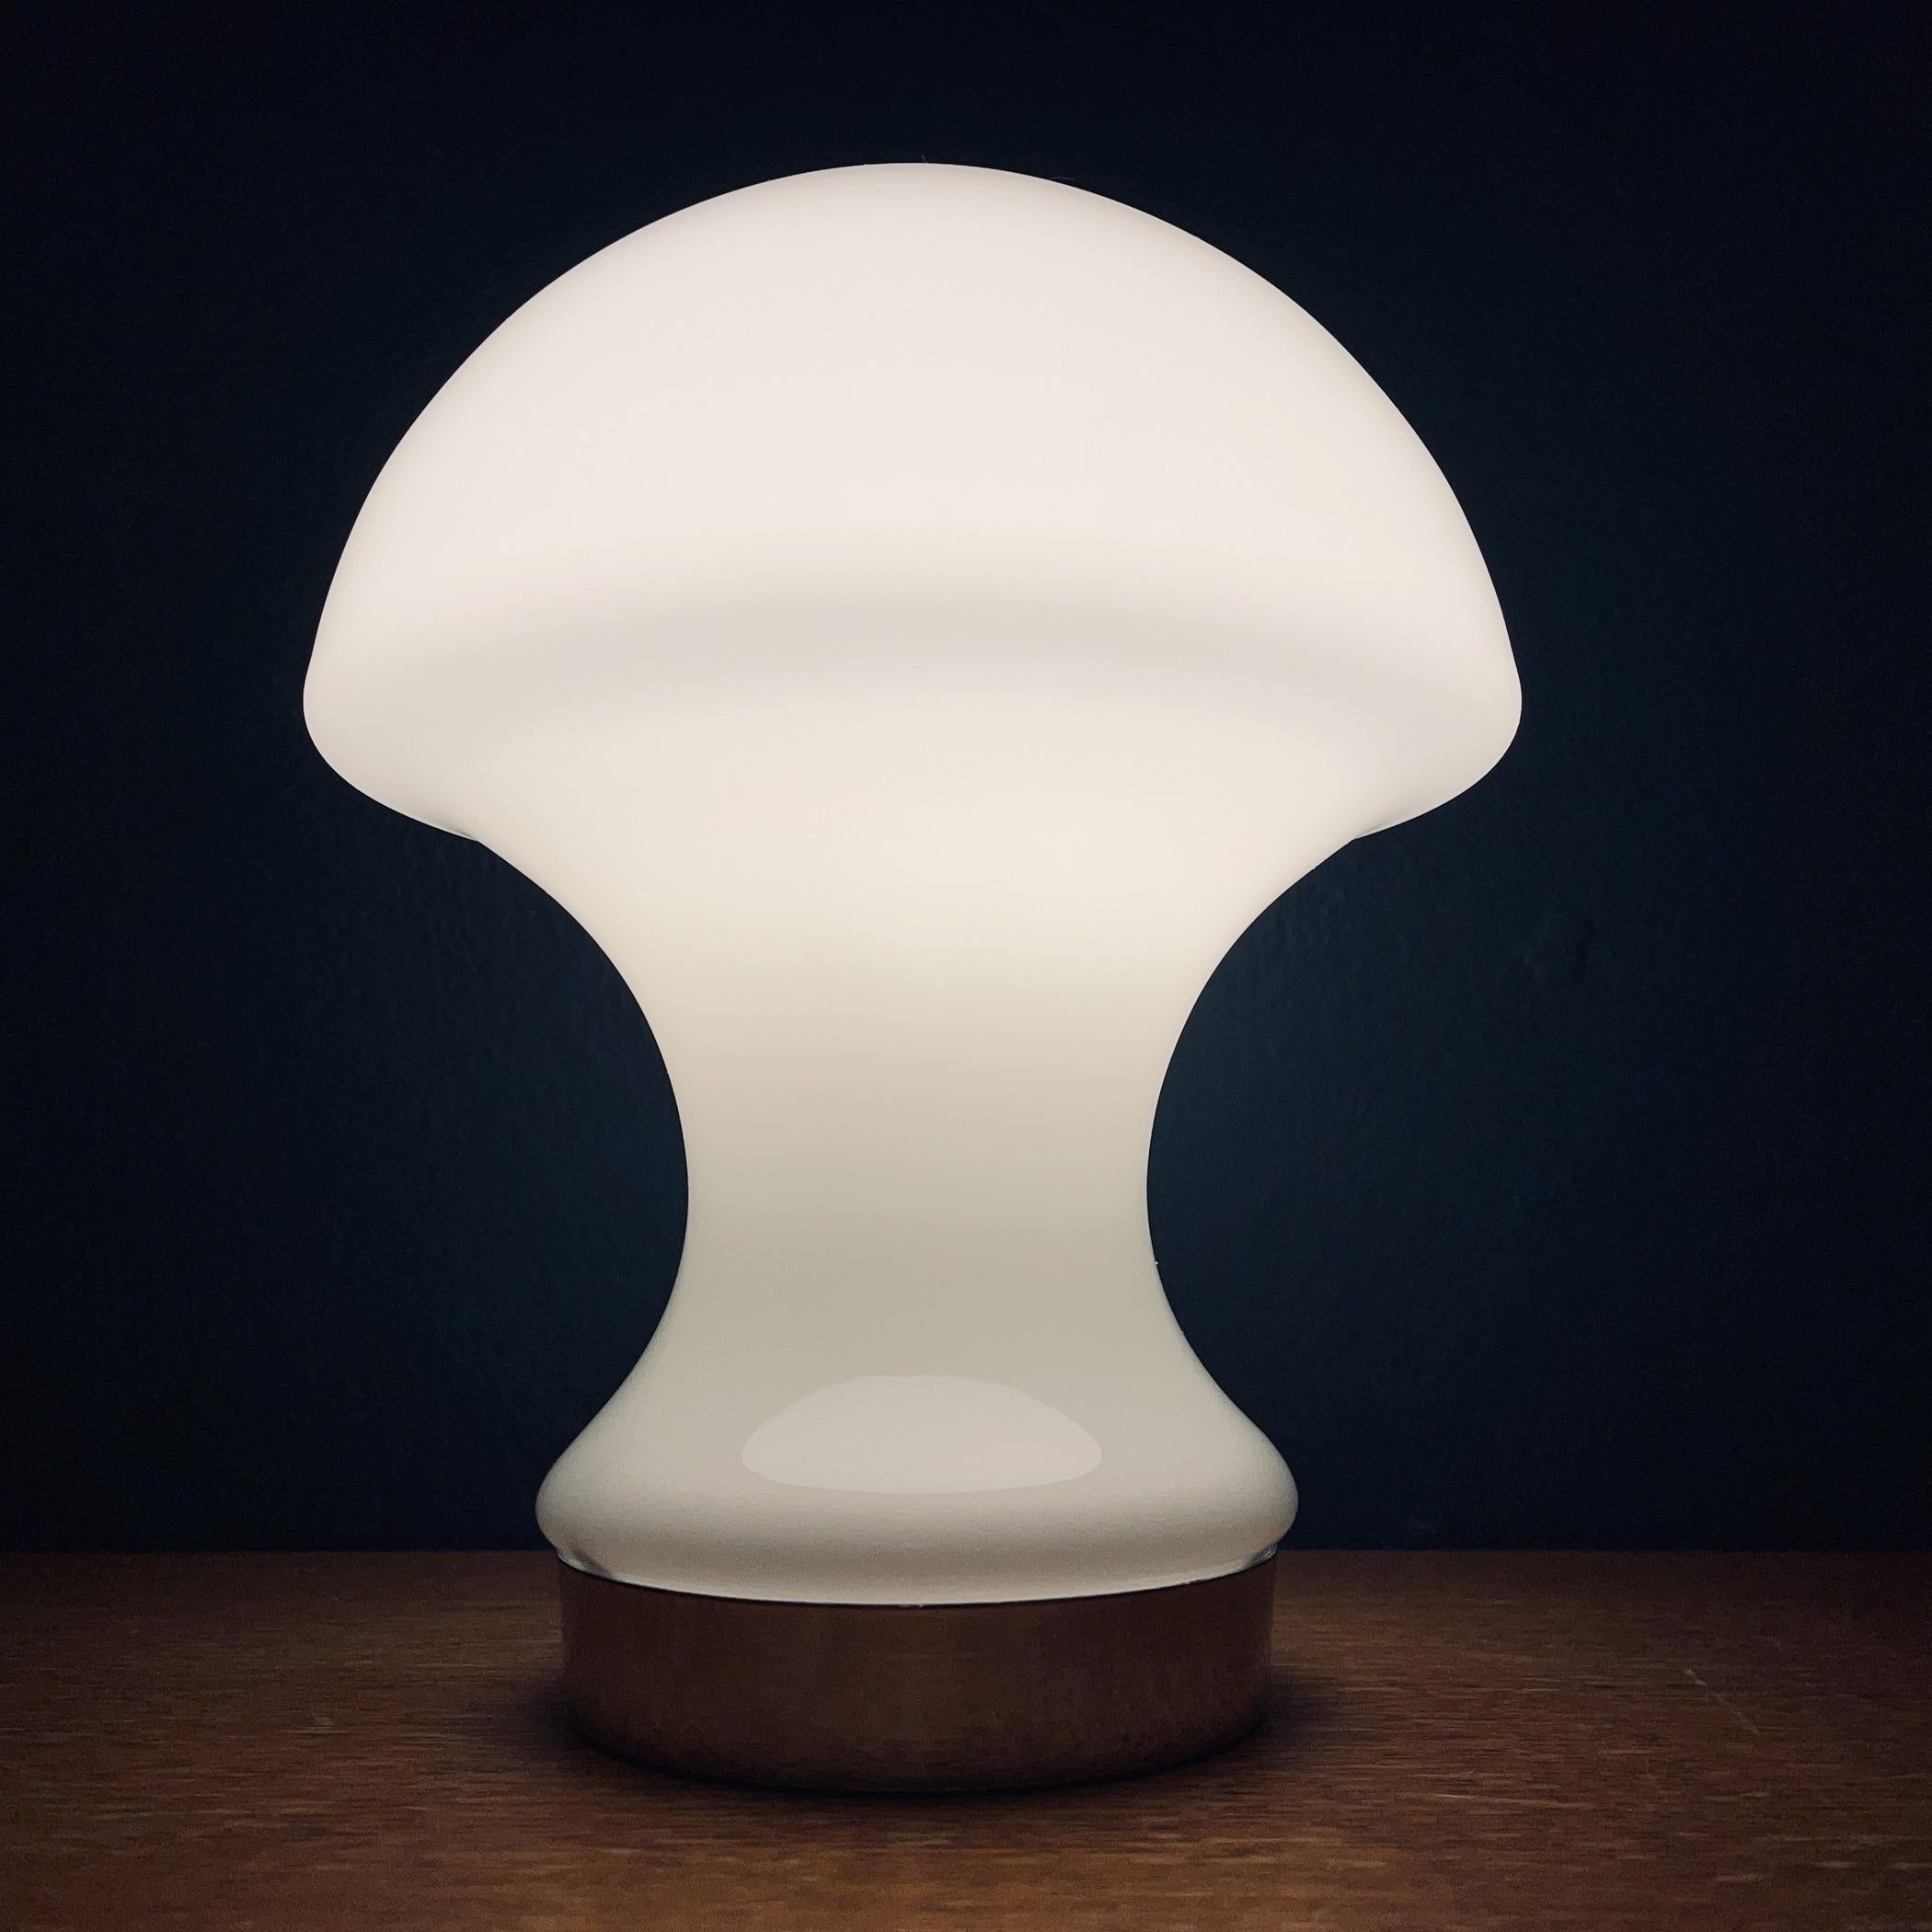 Vintage white mushroom table lamp was made in Italy in the 1980s.
Retro lamp will bring to your home the atmosphere of 70s Italy, the era of the space age. A mid-century table lamp will look great in an Art Deco or Mid-Century Modern